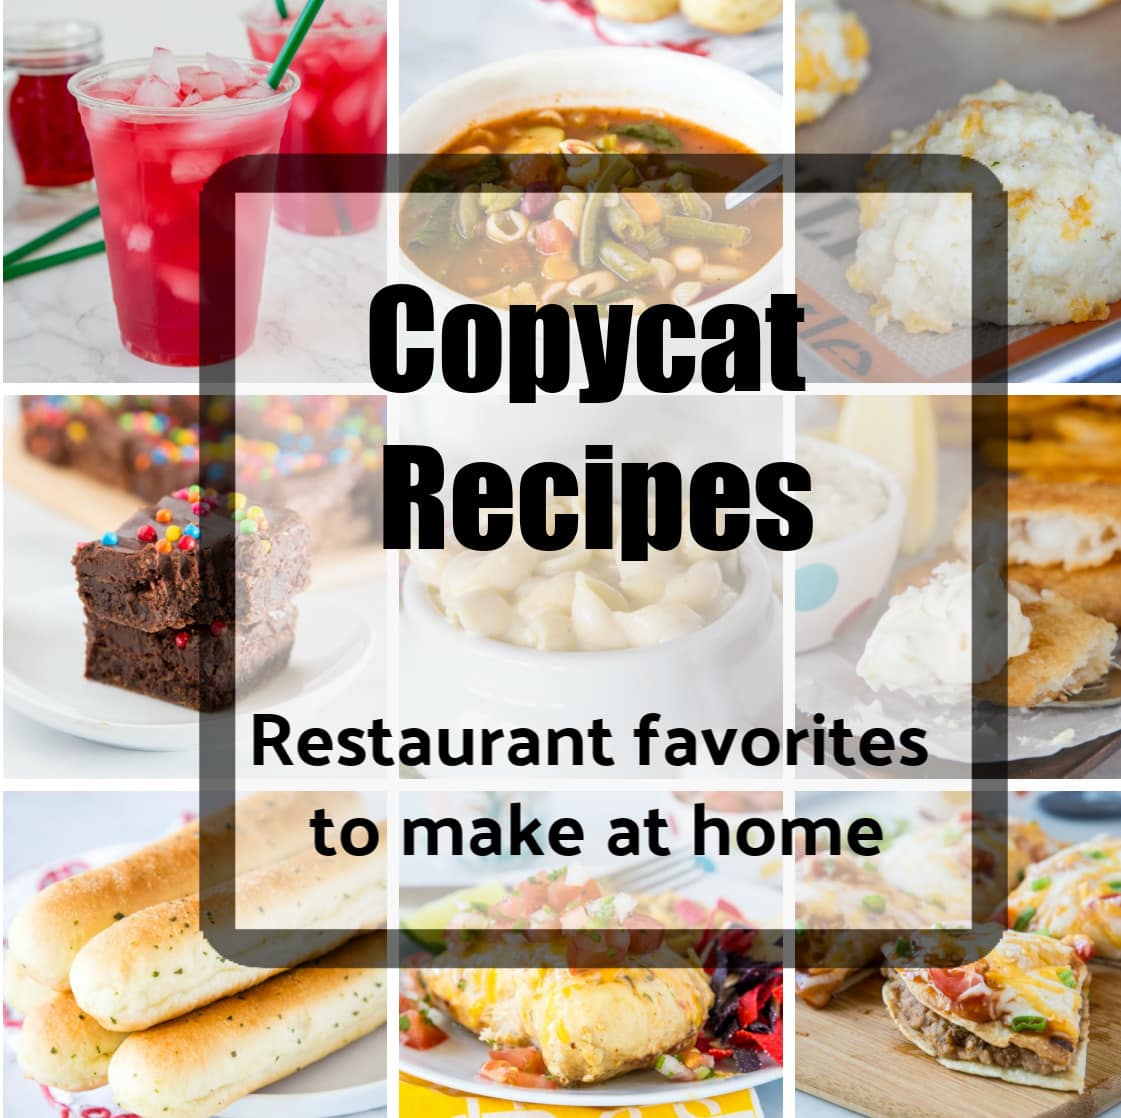 Copycat Recipes - whether you are trying to save money or just don't want to go out, here are some of my favorite homemade versions of famous restaurant recipes. 